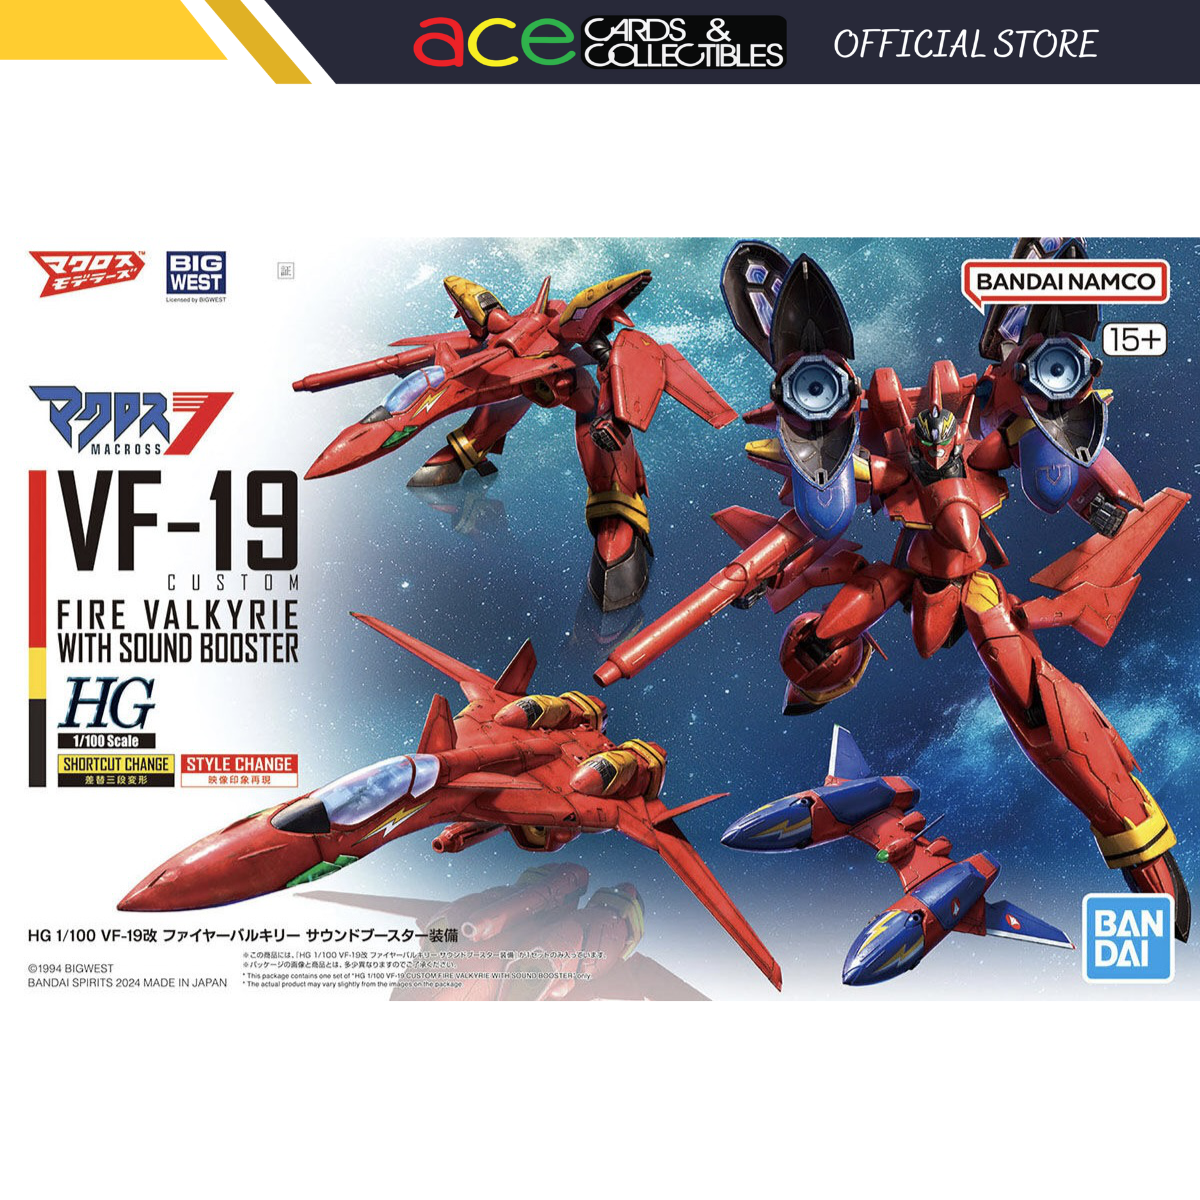 Gunpla HG 1/100 Macross VF-19 Custom Fire Valkyrie With Sound Booster-Bandai-Ace Cards &amp; Collectibles